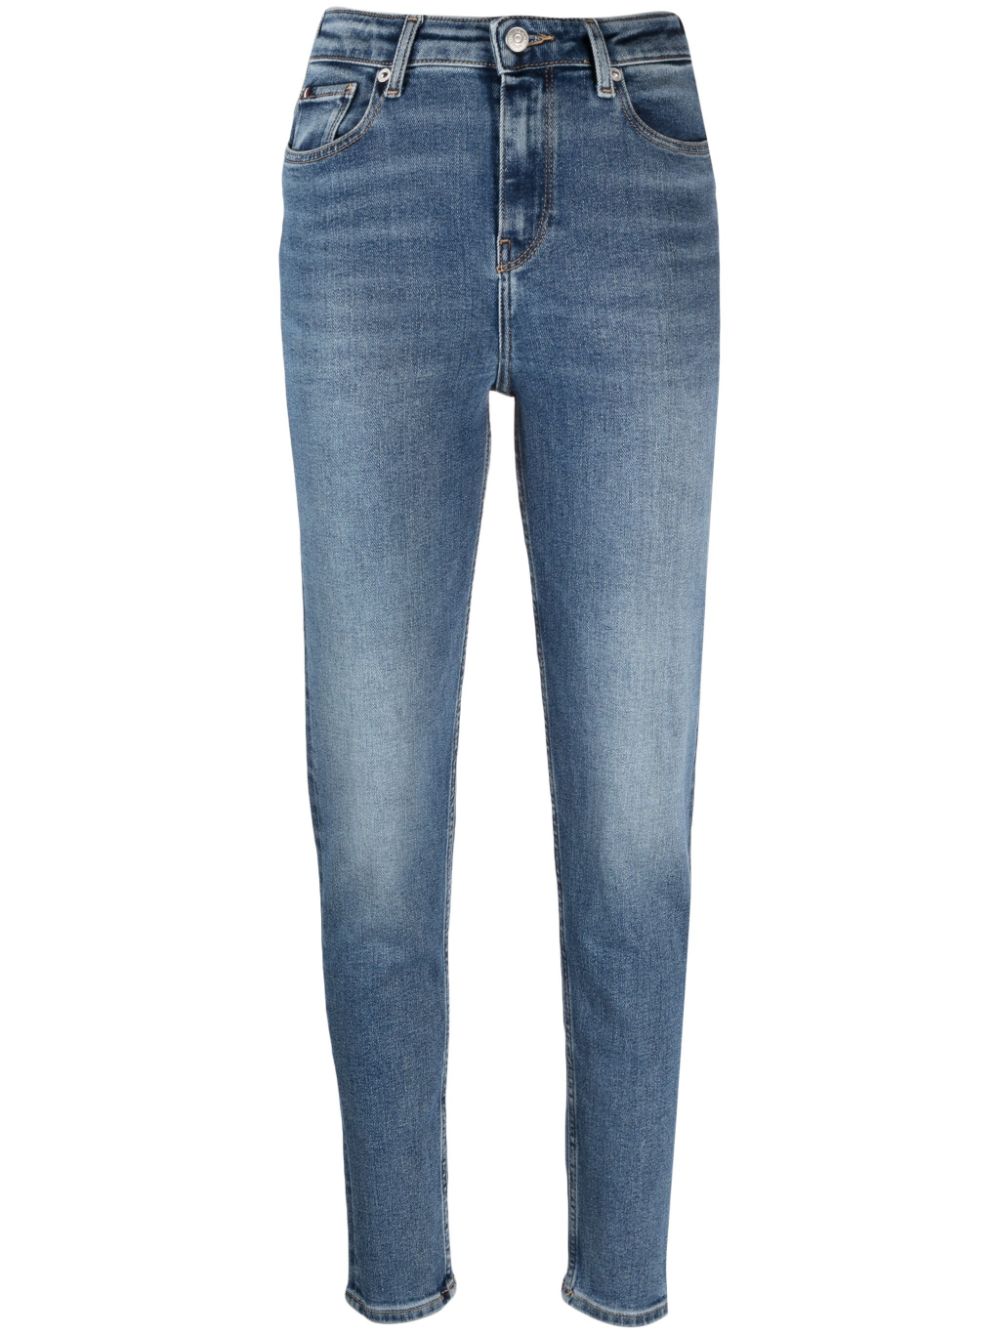 TOMMY HILFIGER GRAMERCY HIGH-RISE TAPERED JEANS